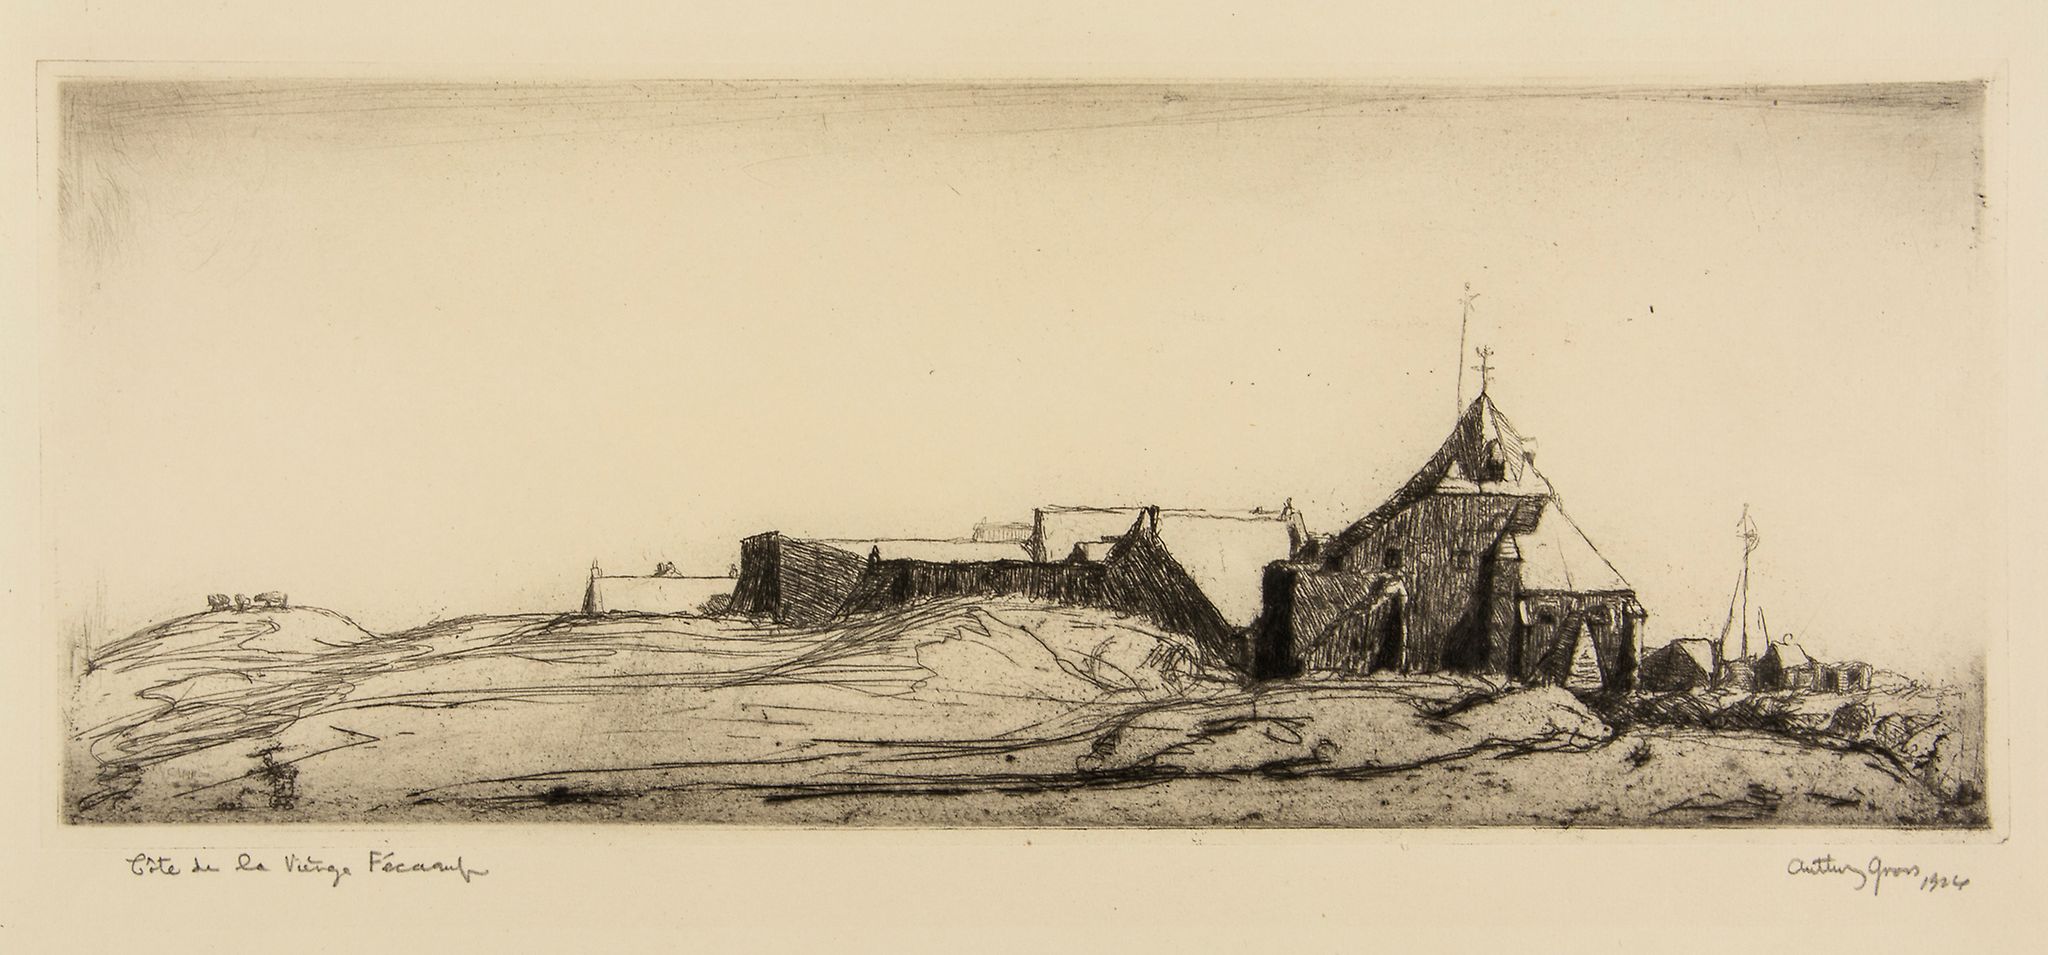 Anthony Gross (1905-1984) - Cote de la Vierge, Fecamp etching with drypoint, 1924, signed, titled